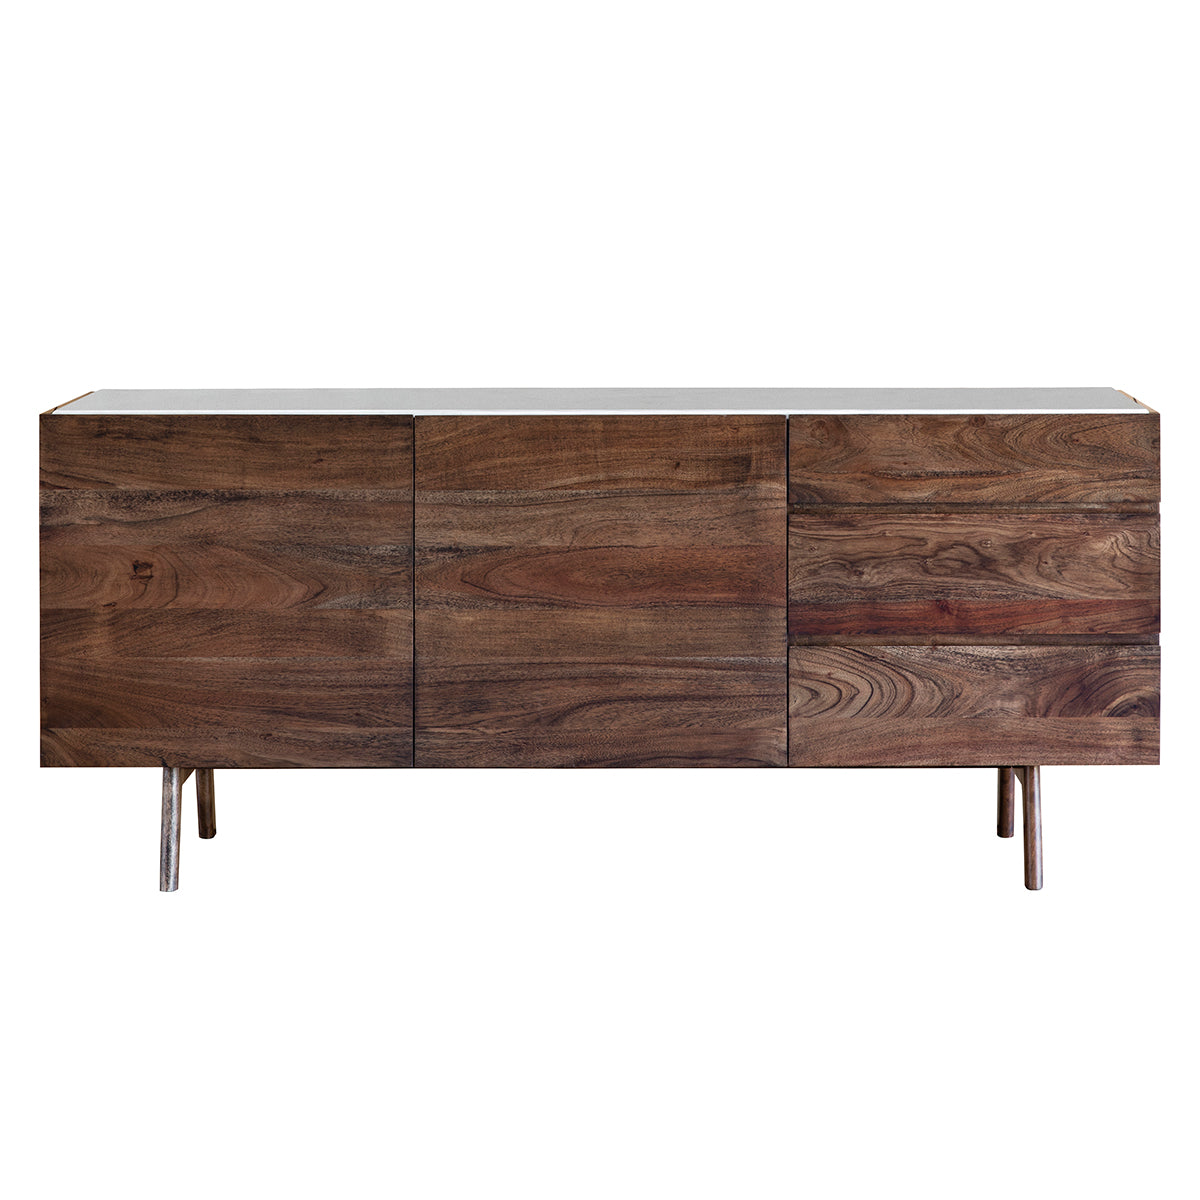 Wooden and marble sideboard with 2 cupboards and 3 drawers storage, front view